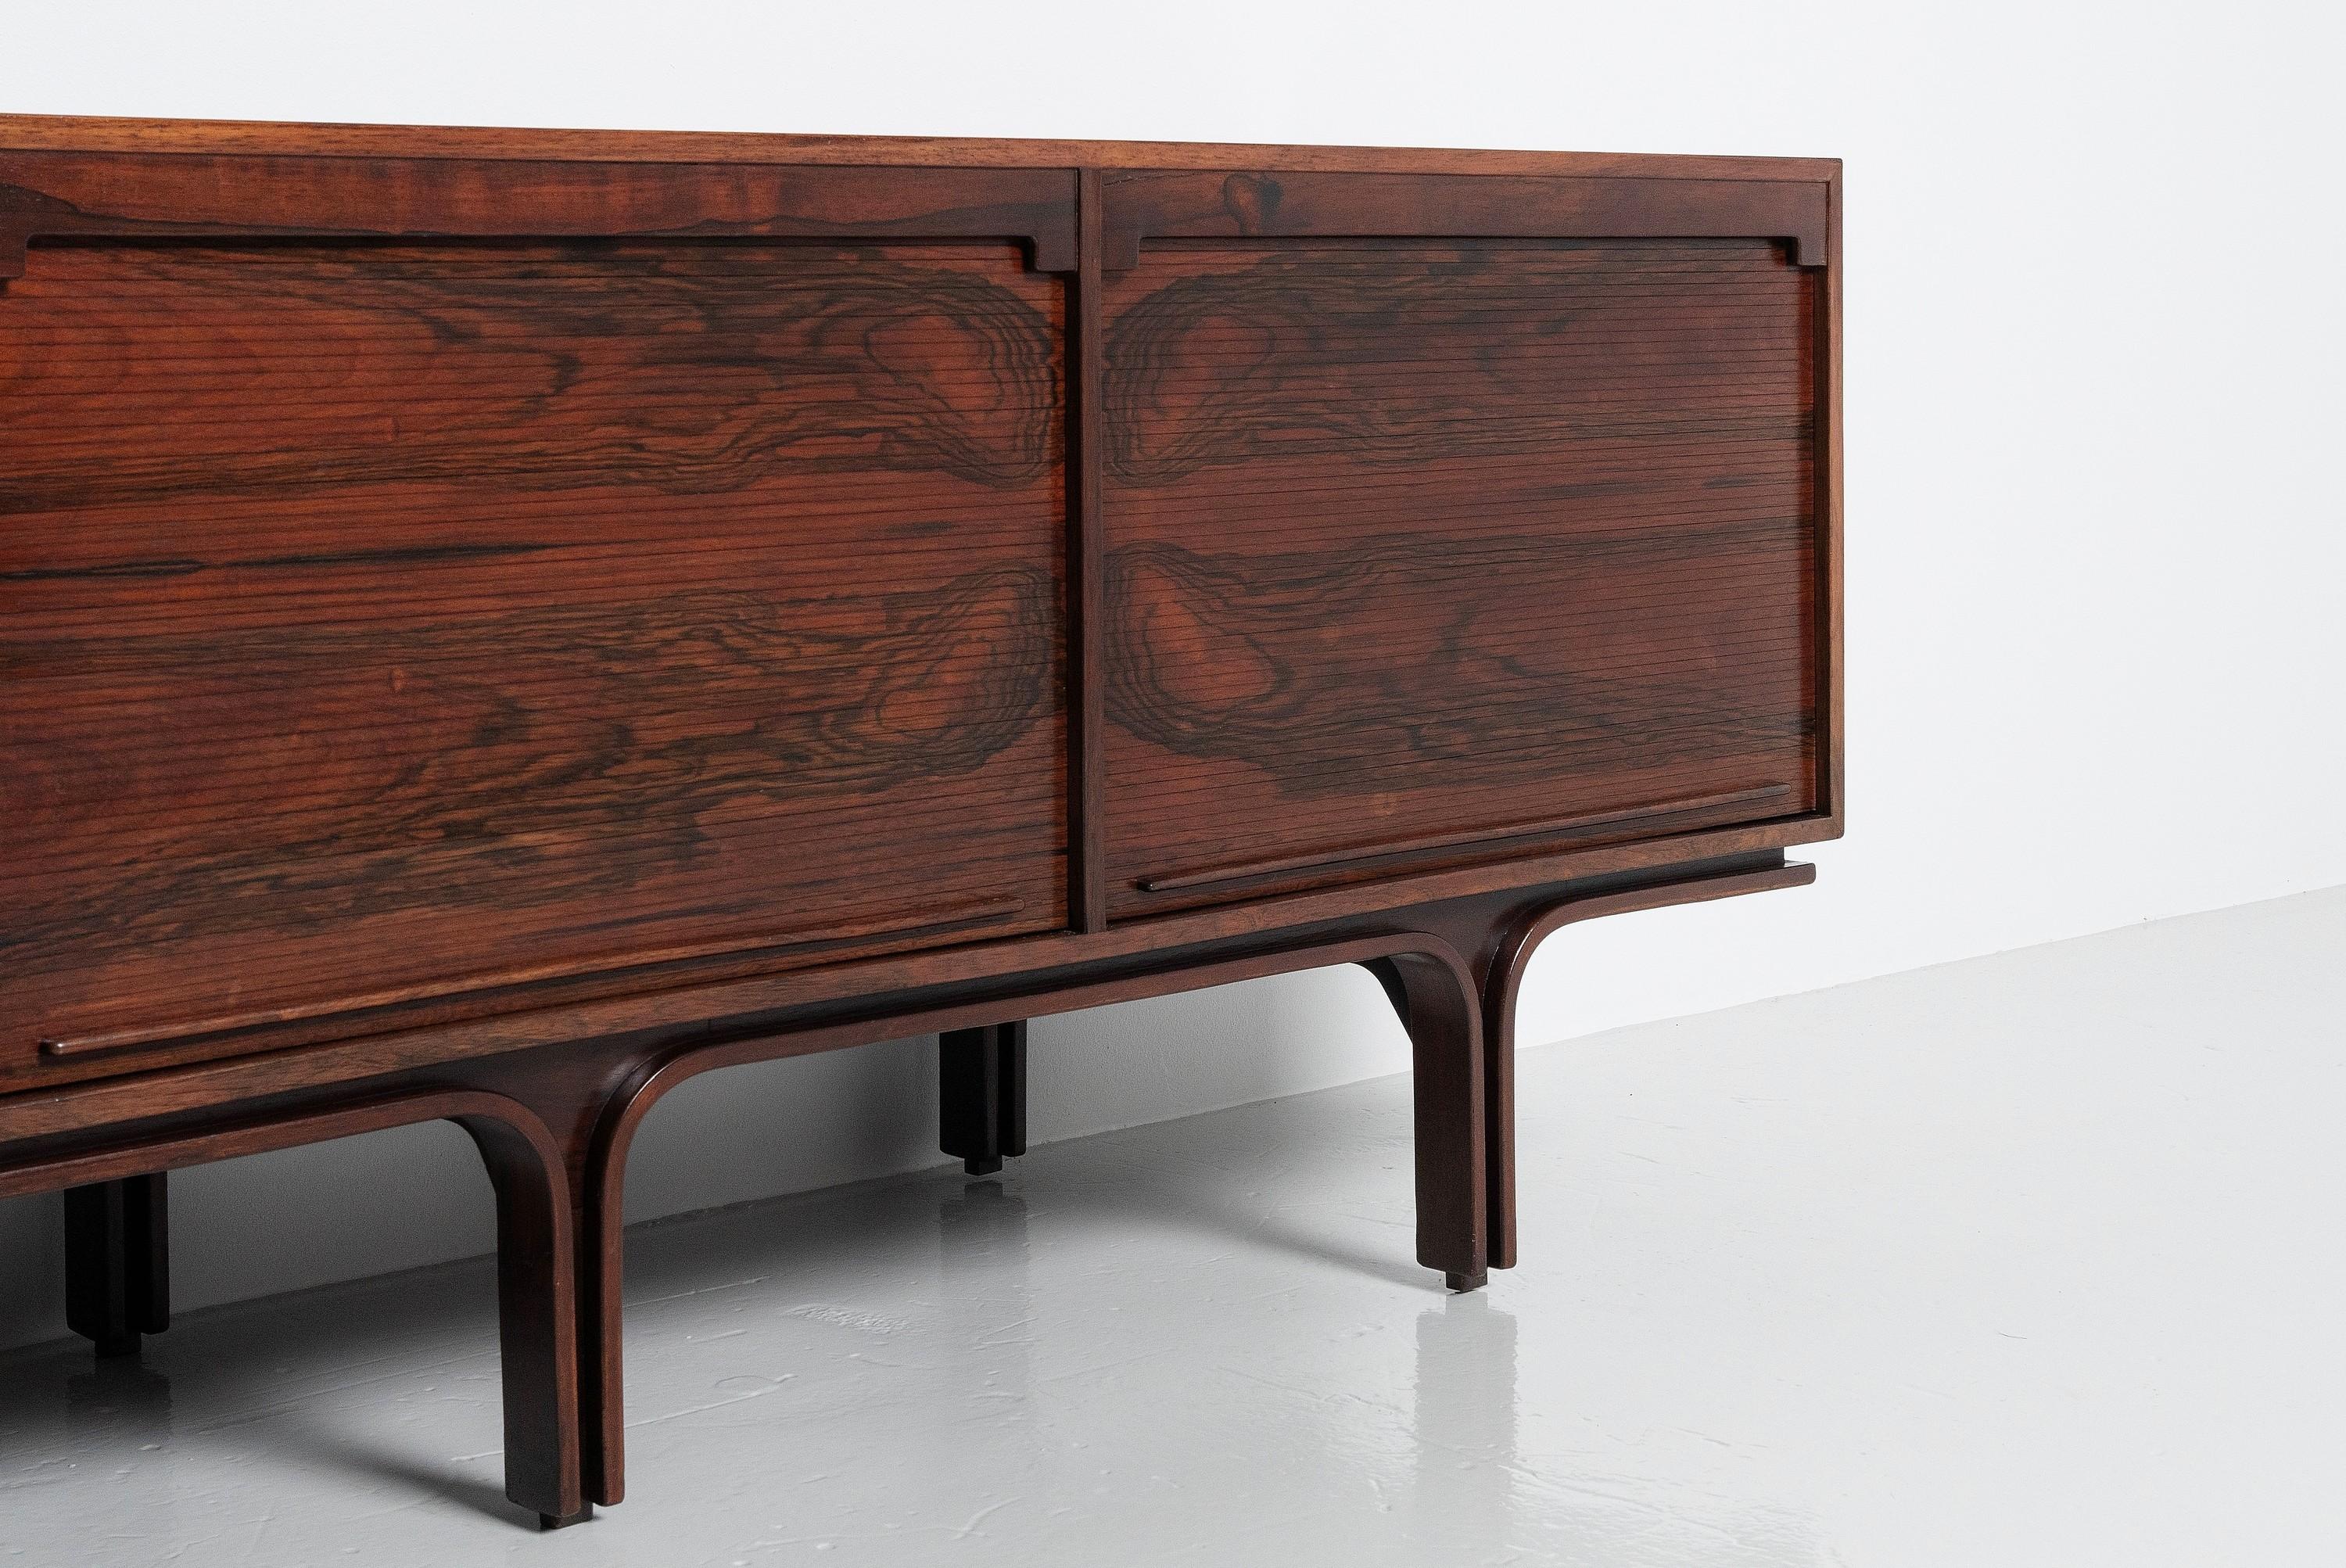 Gorgeous and very highly detailed sideboard designed by Gianfranco Frattini and produced in Italy by Bernini in 1957. This sideboard is still in original condition and has apart from minor surface marks due to it's age, no significant signs of wear.